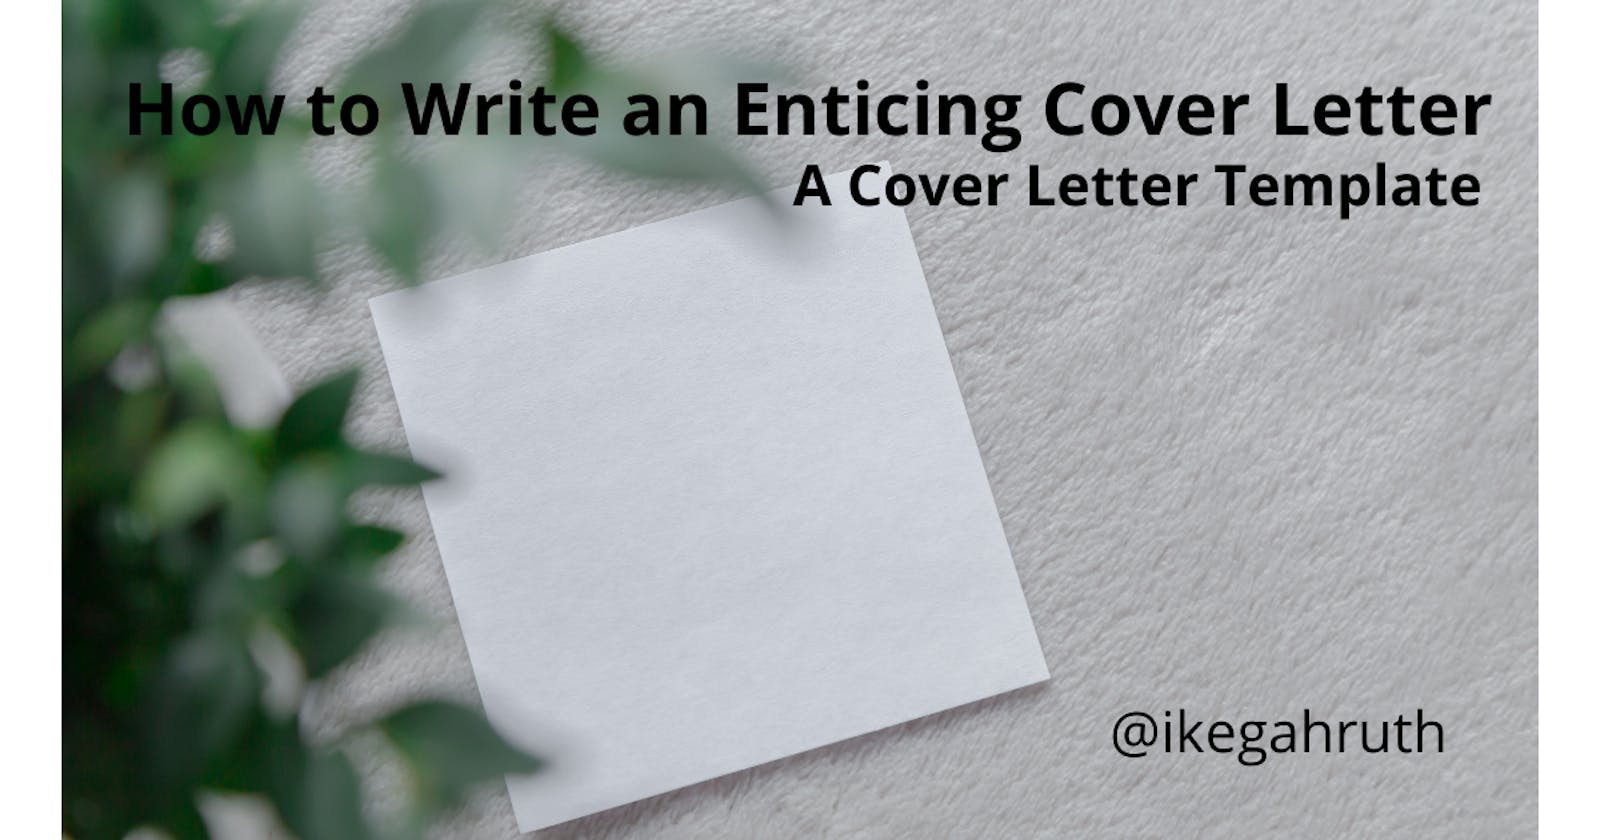 How to Write an Enticing Cover Letter